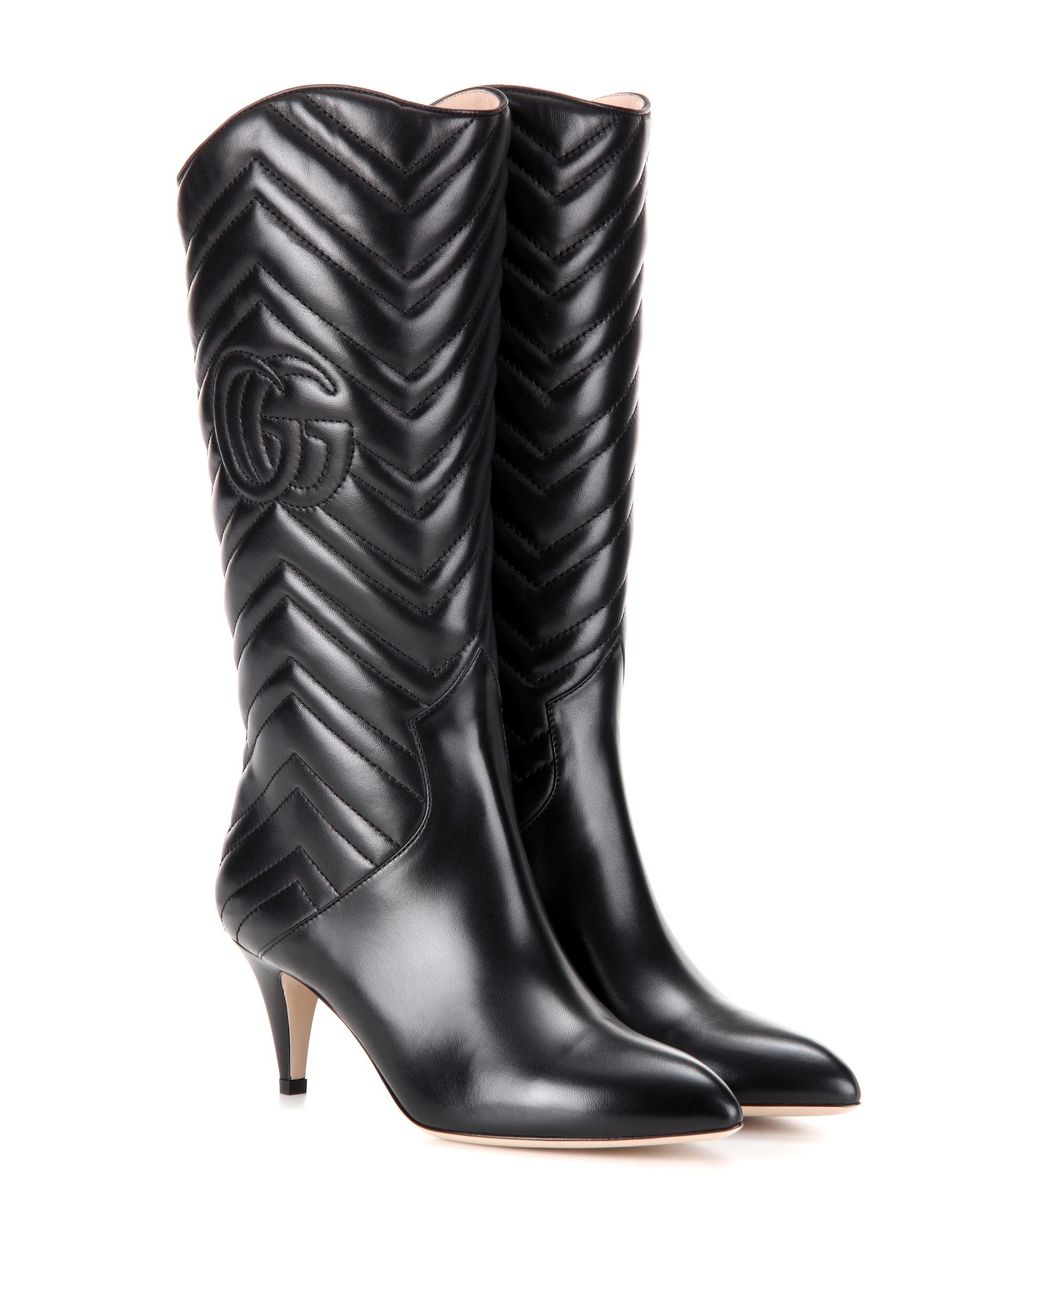 Gucci Matelassé Leather Boots in Black | Lyst